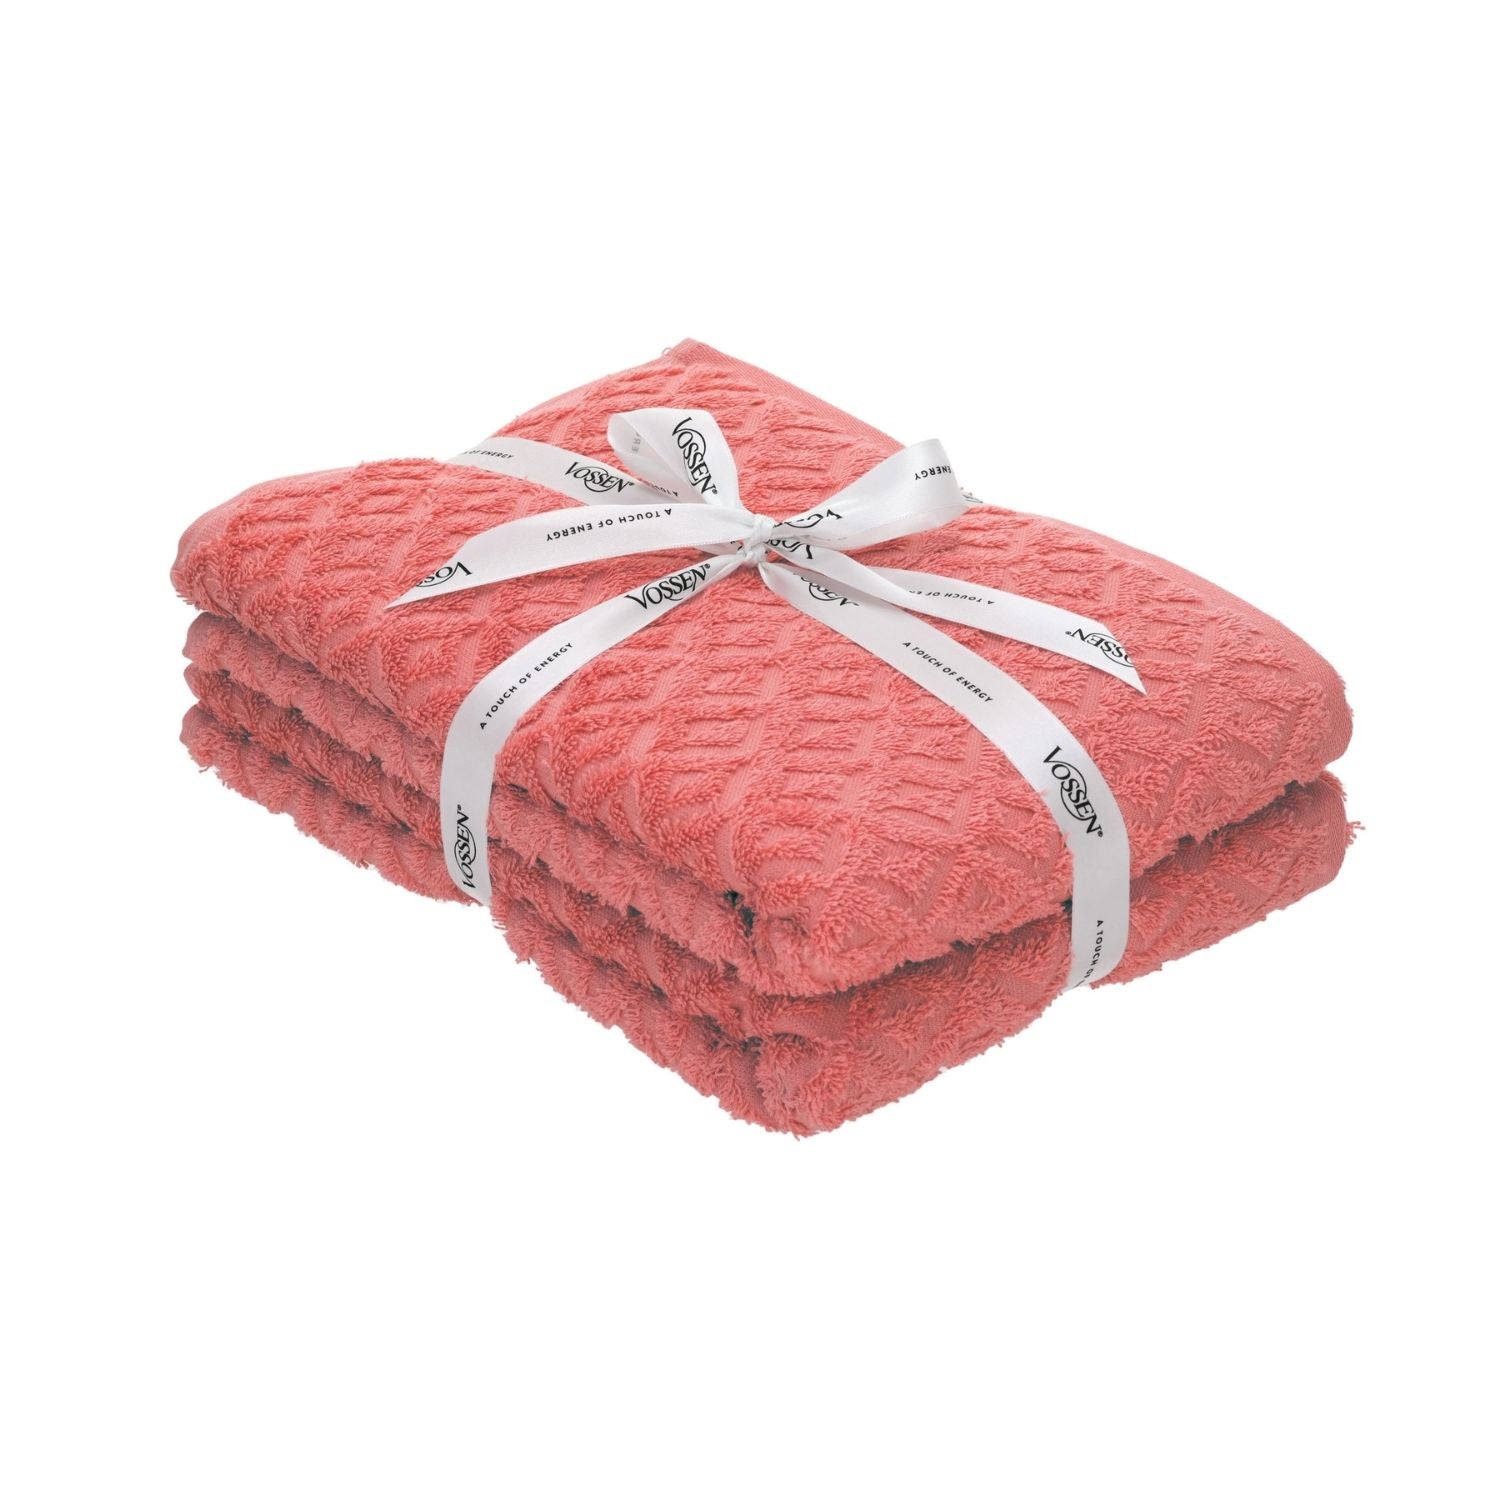 Vossen Graphic Bath Towel -Set Of 2 - Red 1 Shaws Department Stores